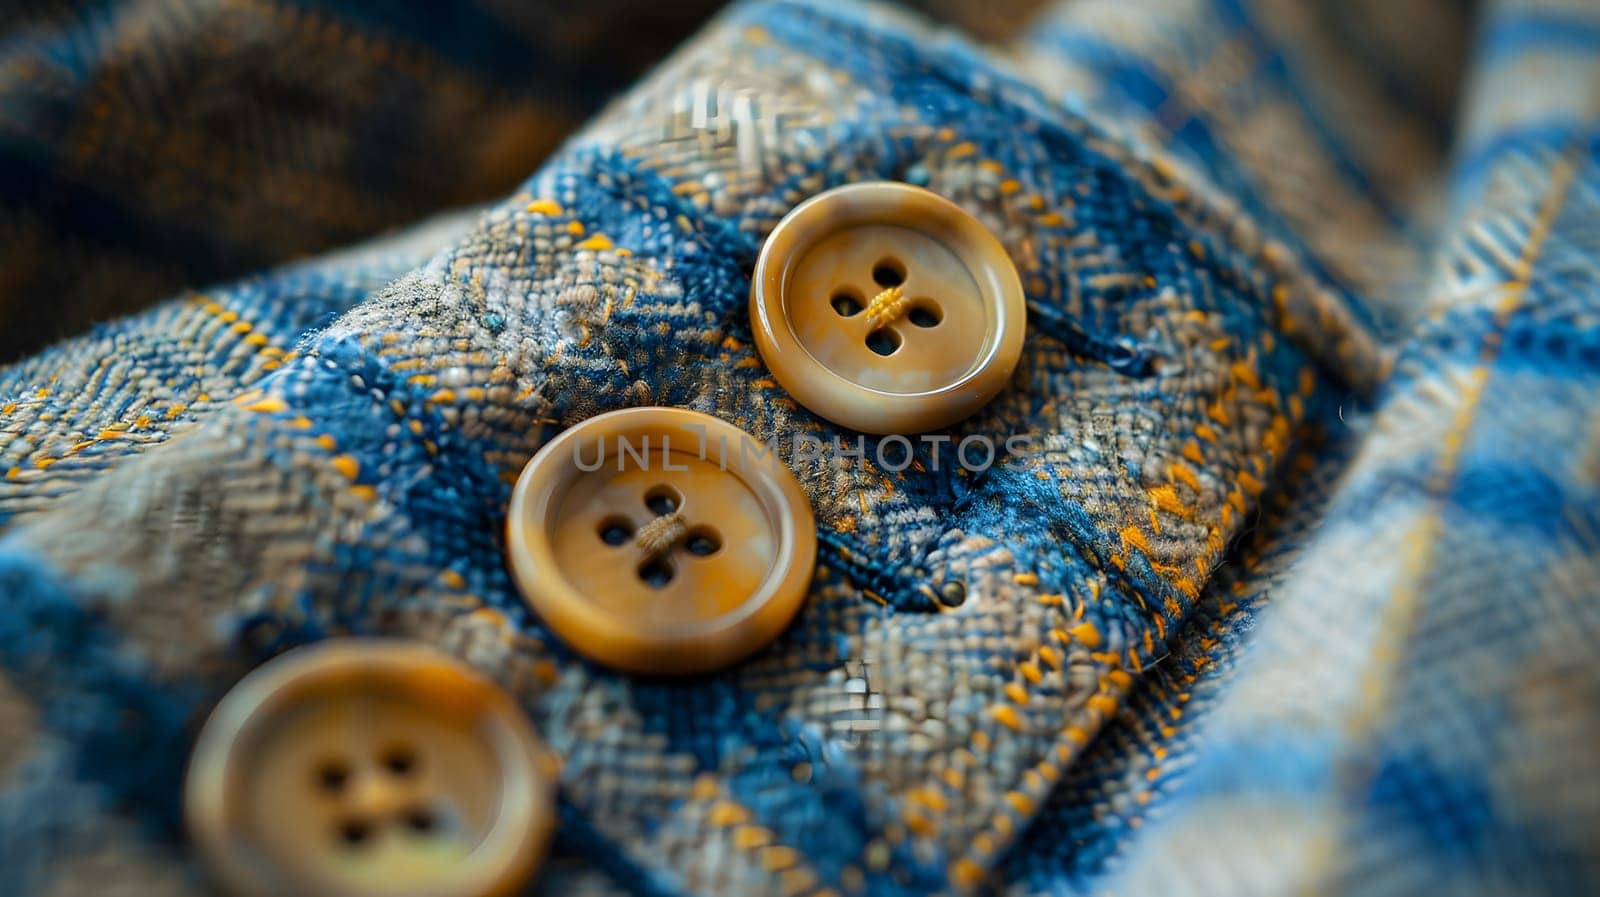 Closeup of 3 electric blue buttons on a blue yellow plaid shirt by Nadtochiy